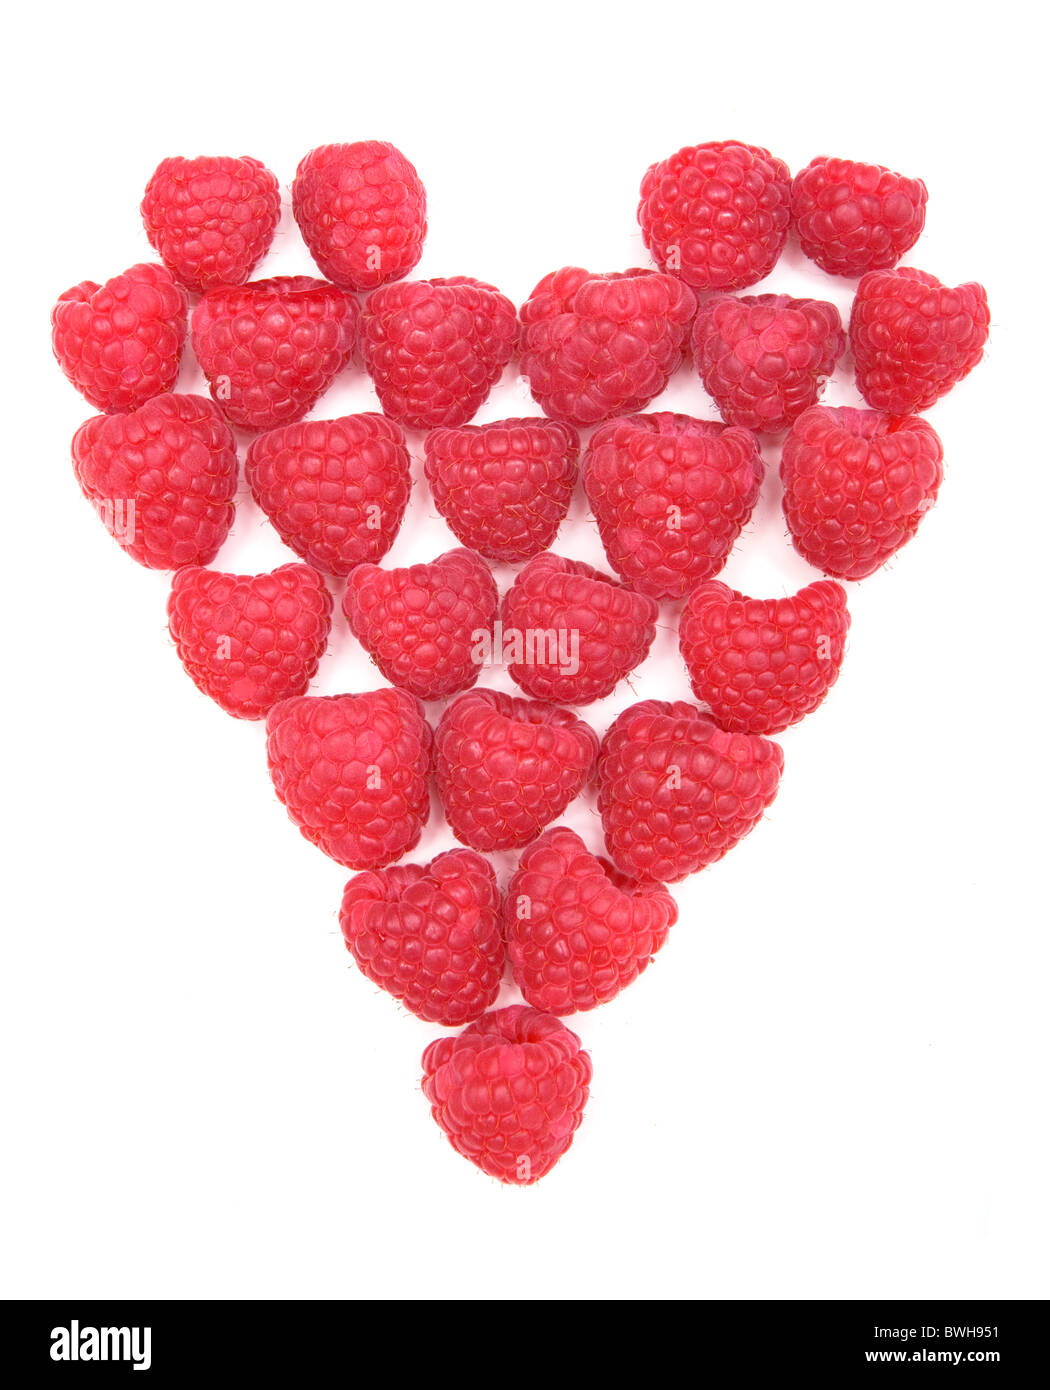 Raspberries formed into Heart Shape - A Healthy Diet Stock Photo